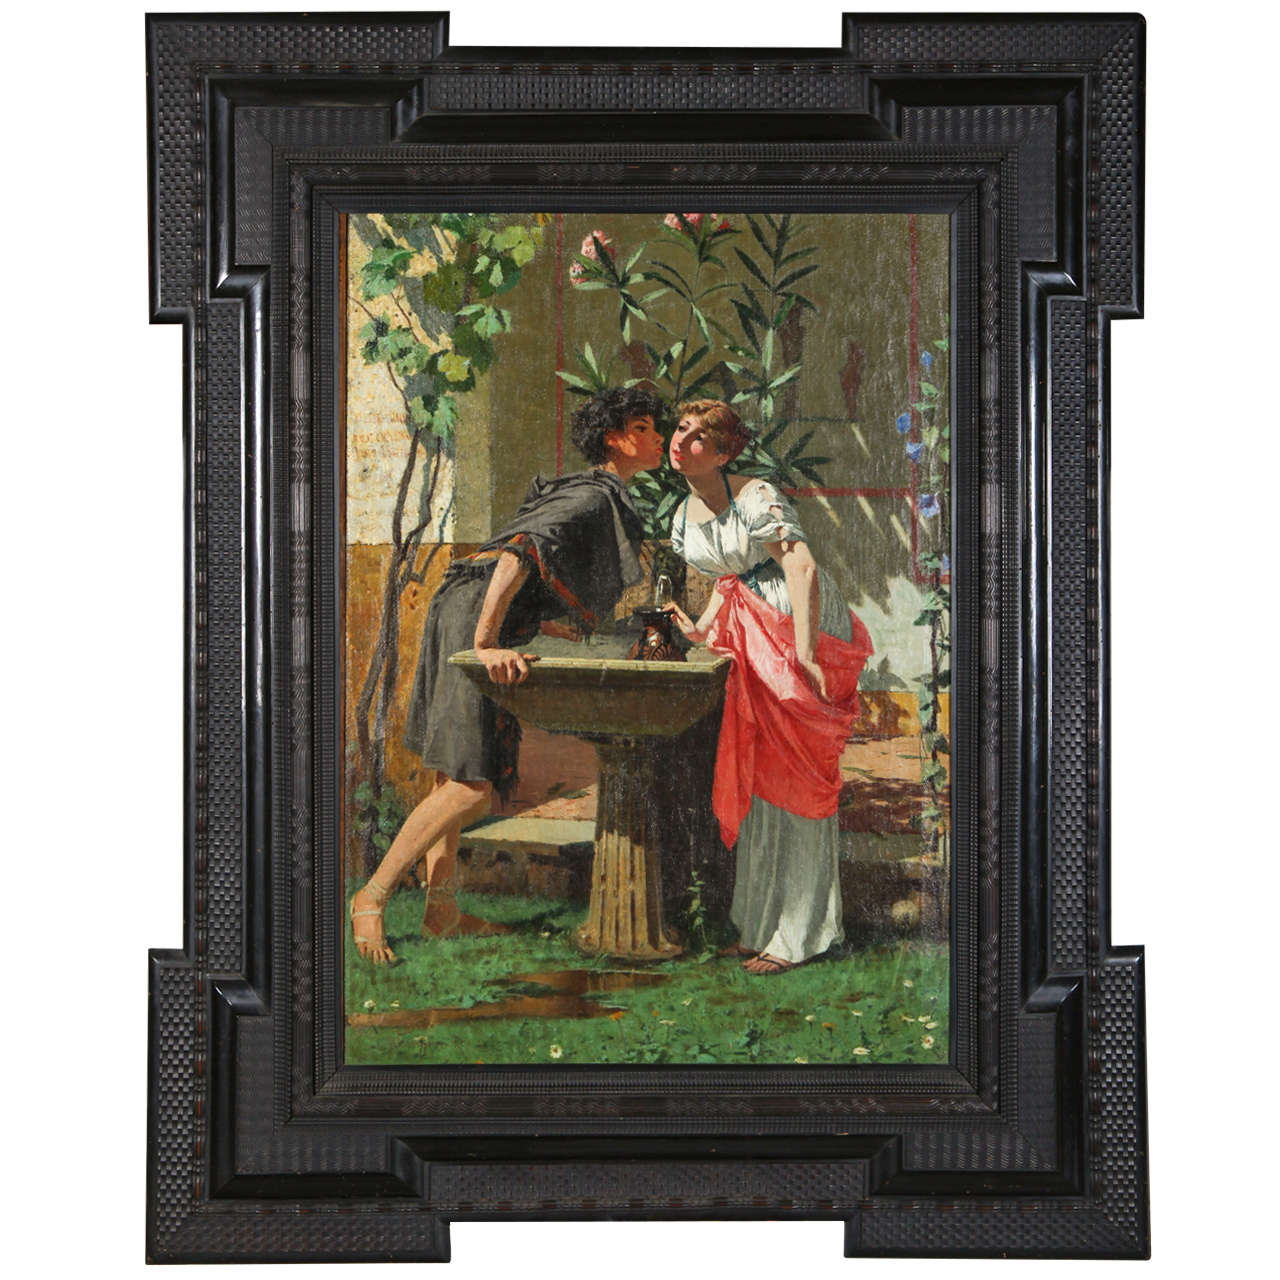 Lovers by a Fountain 19th Century Painting Oil on Canvas, Modesto Faustini, 1860 For Sale 2